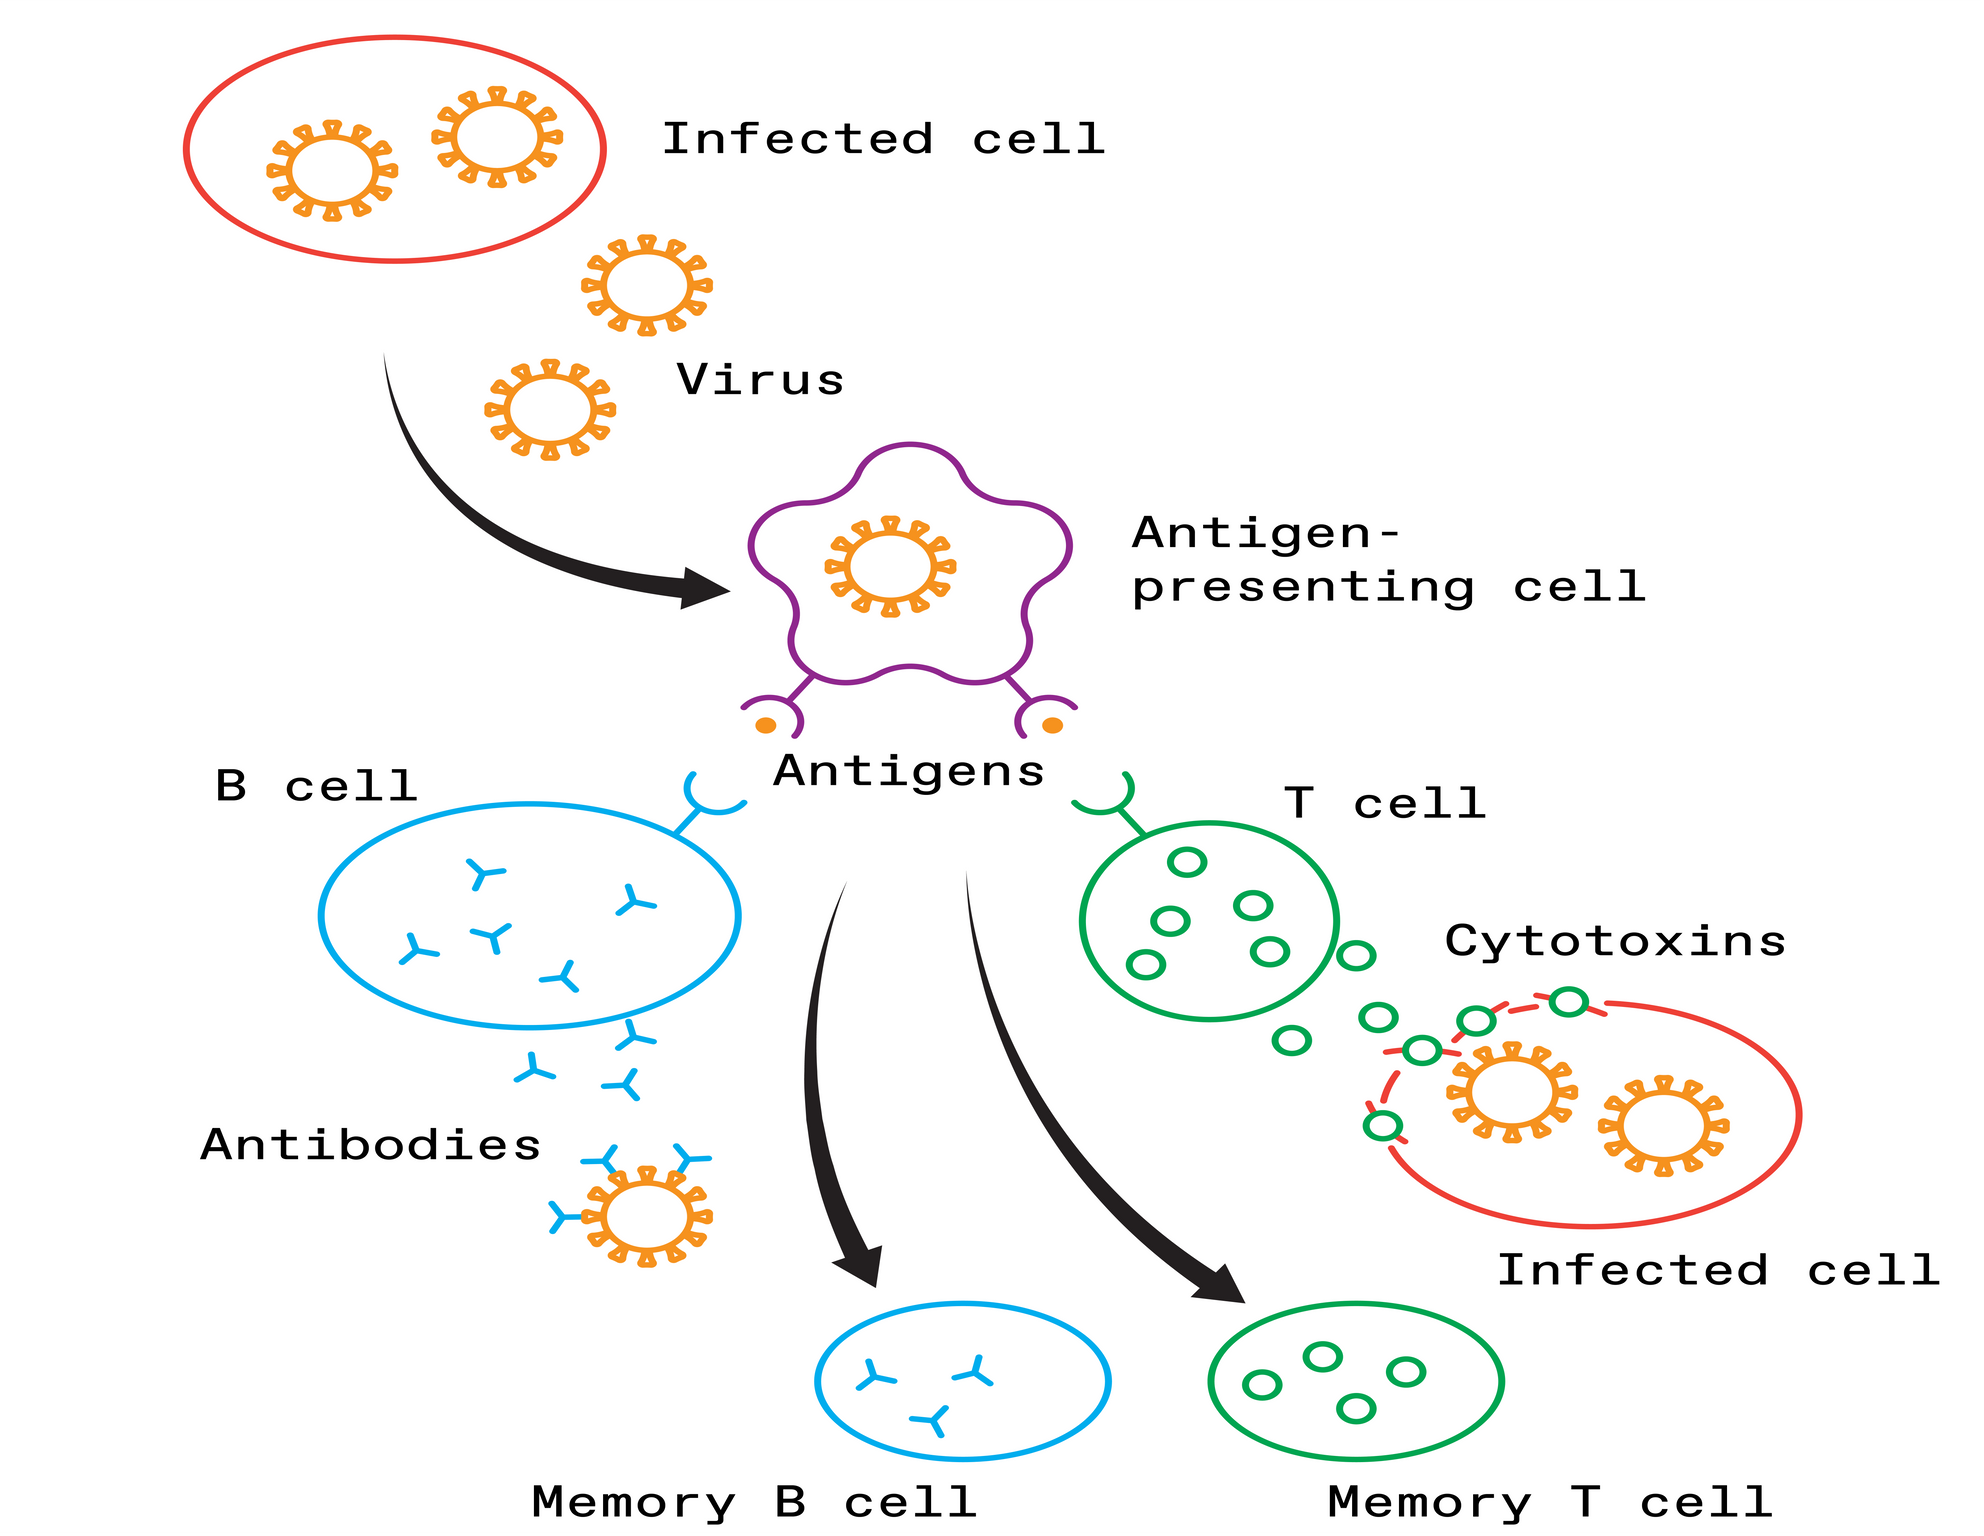 In the body's adaptive immune response, specialized cells engulf the virus and present fragments of it, called antigens, to activate immune cells. B cells begin to make antibodies that bind to viral particles and prevent them from attaching to healthy cells, while T cells destroy cells that have already been infected. Meanwhile, memory B and T cells take note of the antigens, ensuring that the body will respond quickly if it encounters the coronavirus again. 